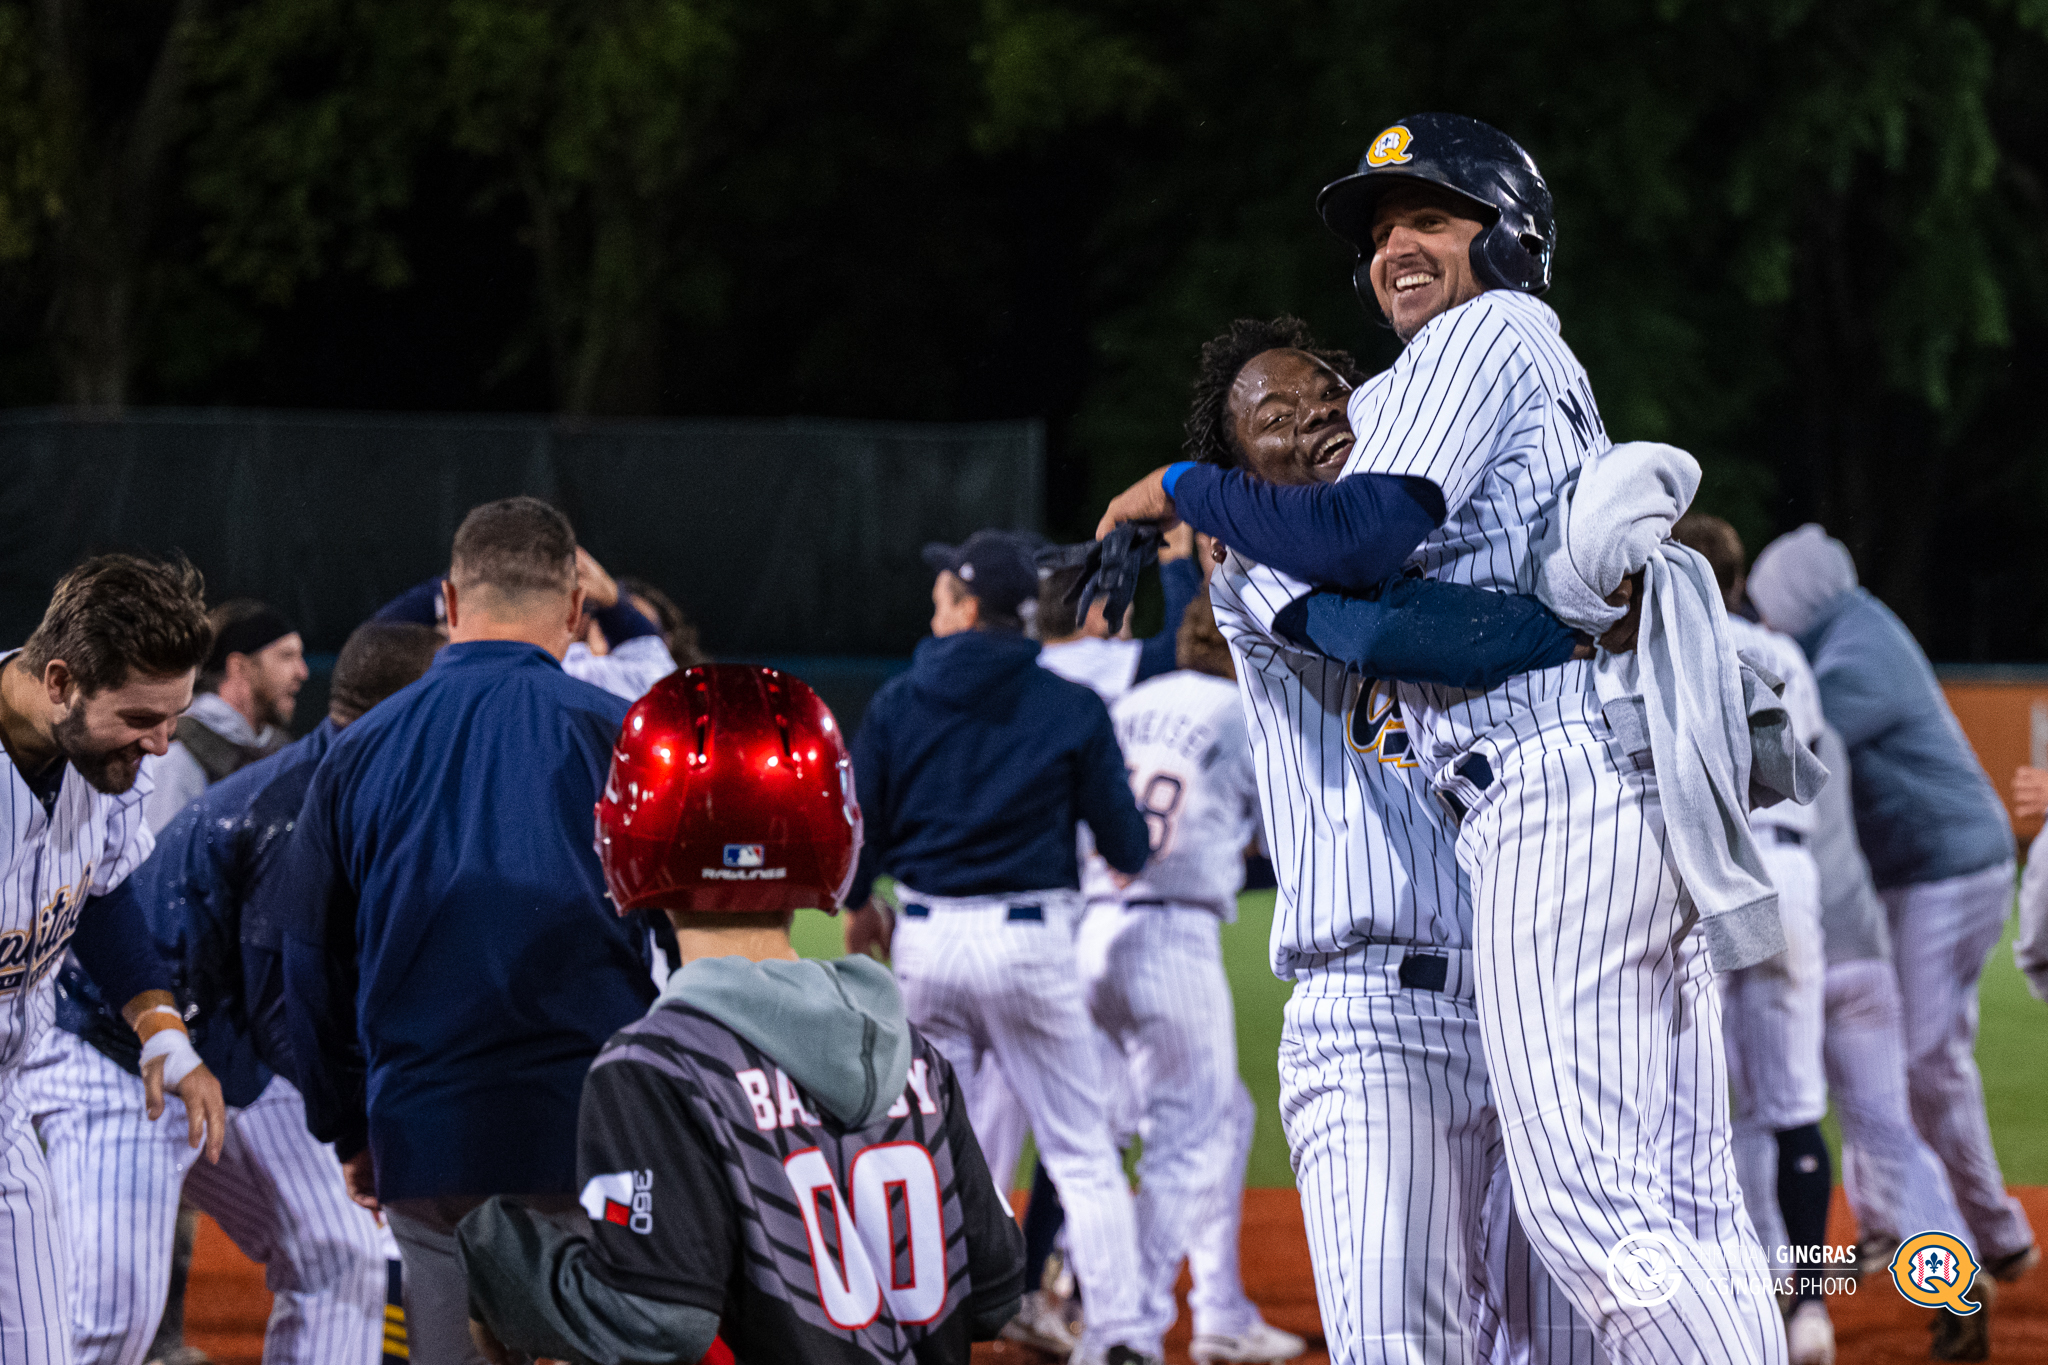 CAPITALES WALK-OFF BOOMERS TO TAKE GAME 3